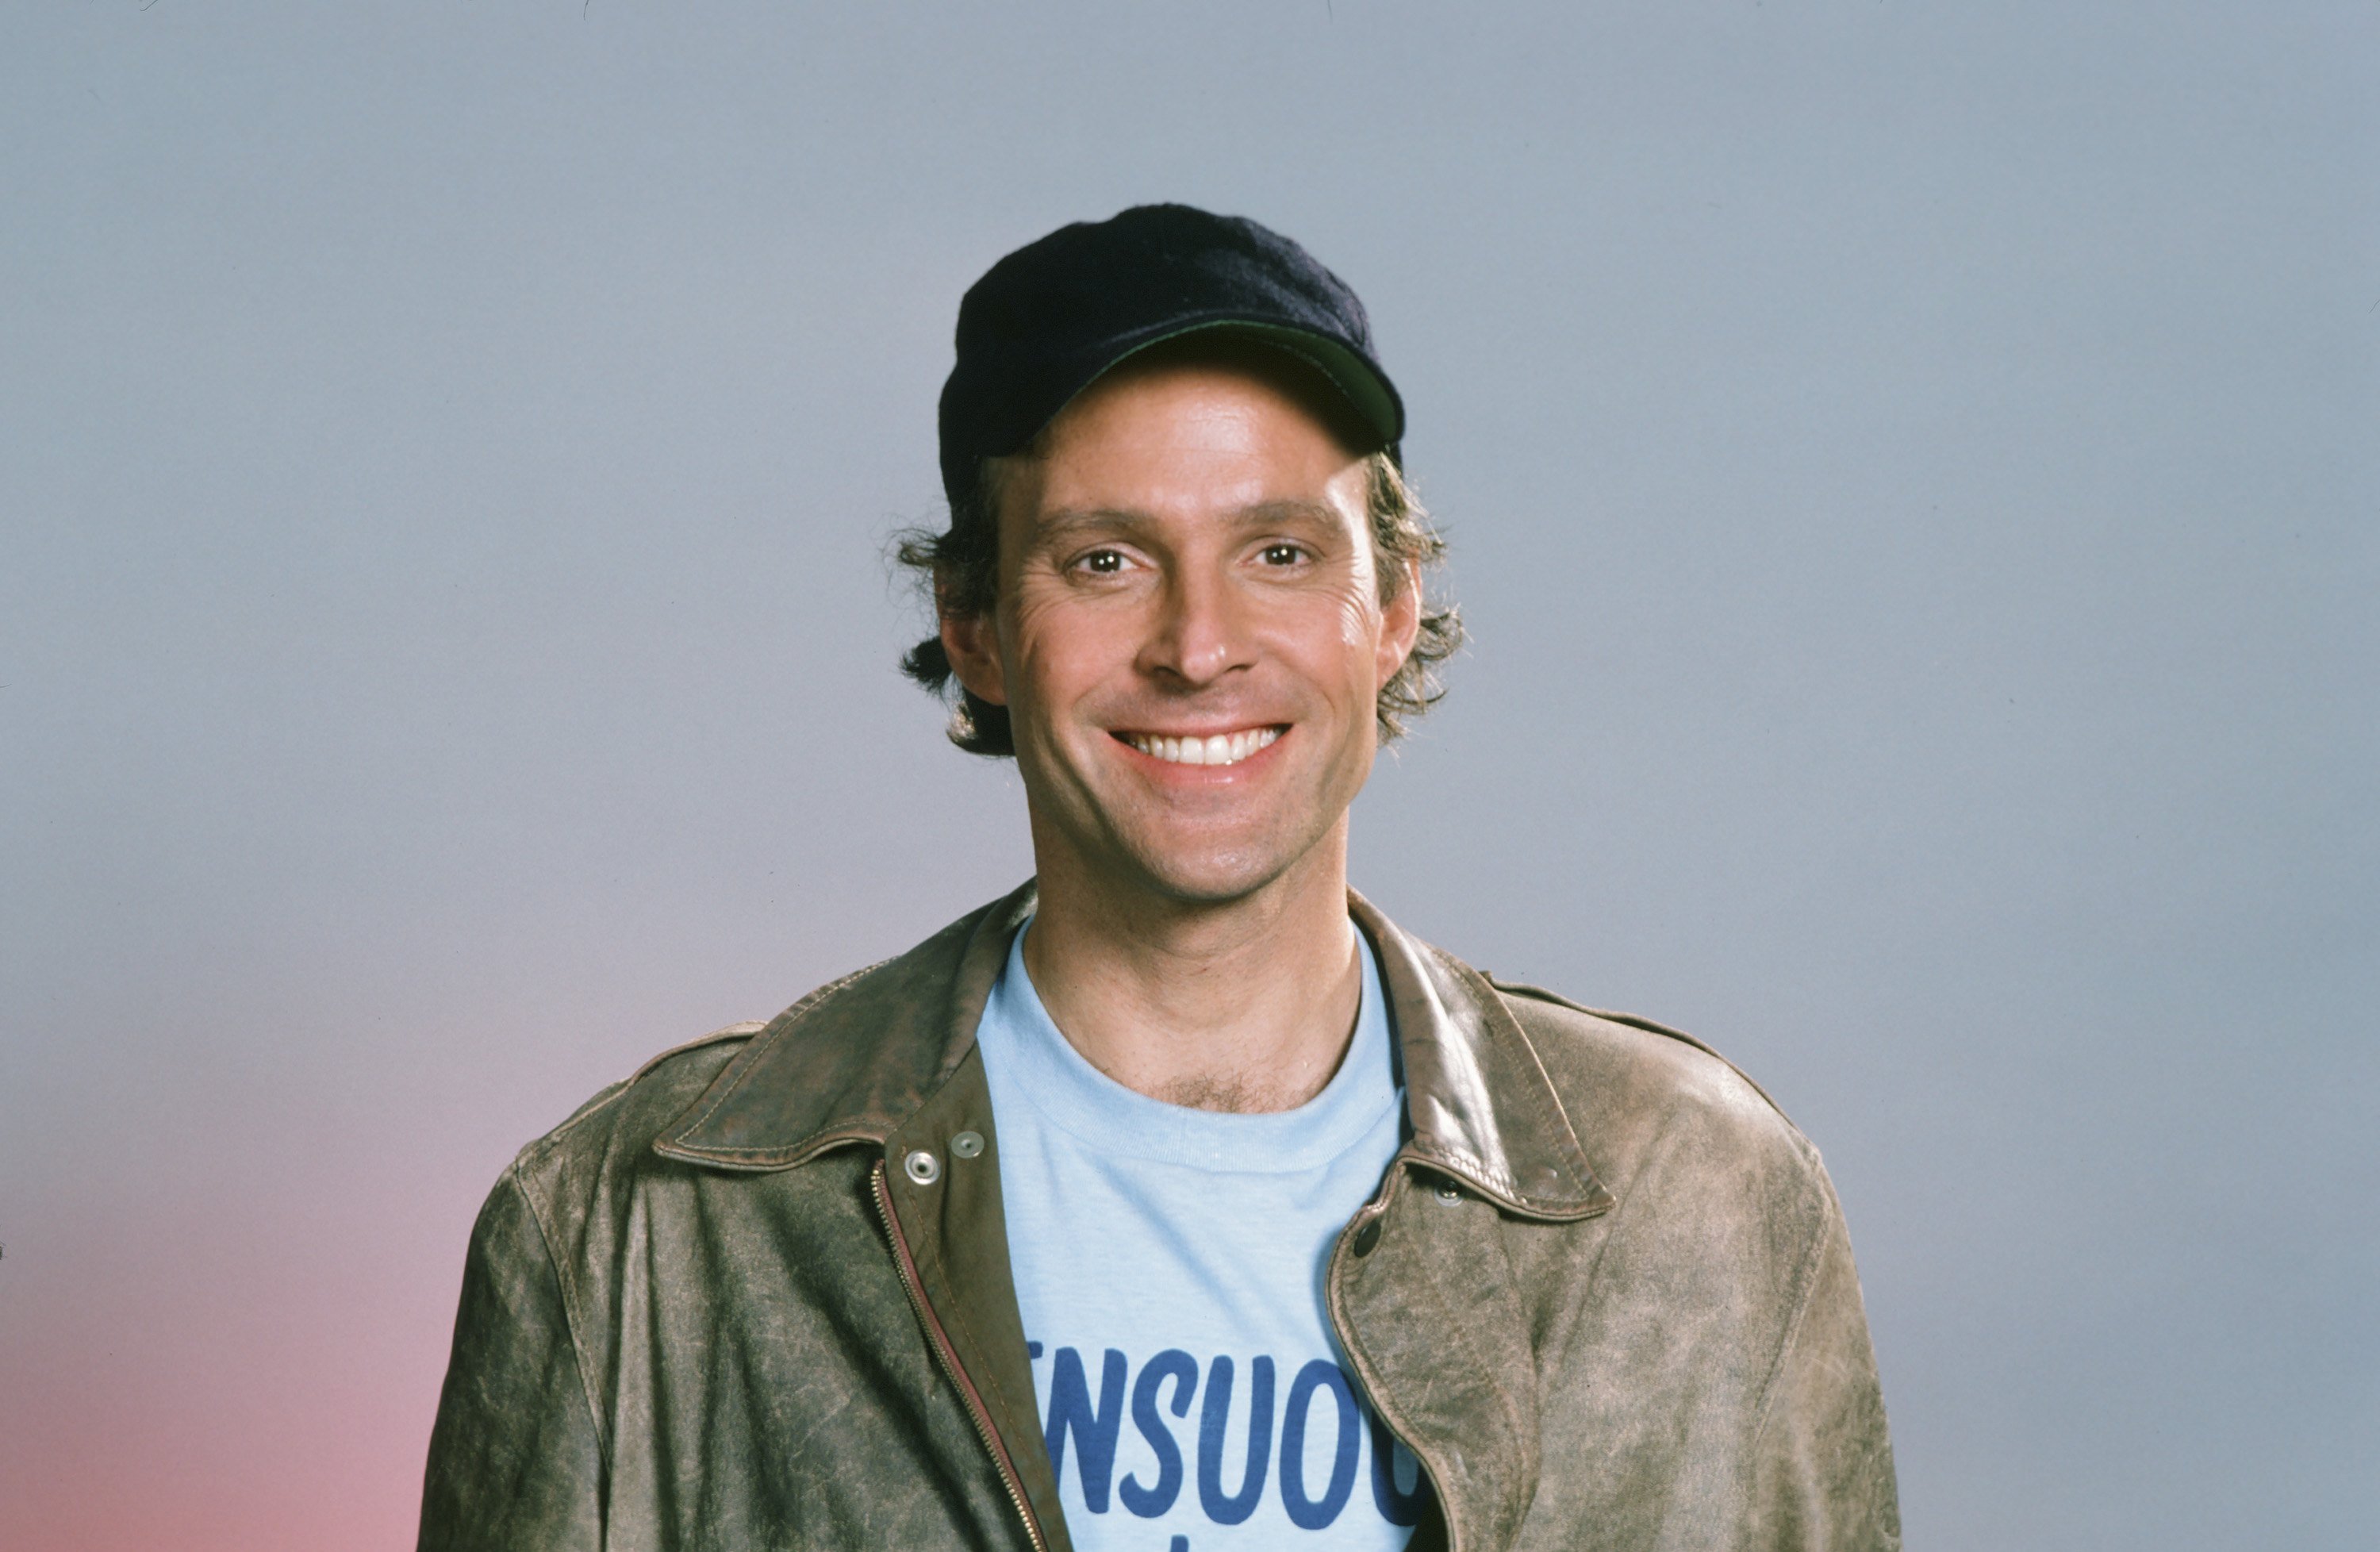 Dwight Schultz pictured in a studio as Captain "Howling Mad" Murdock for the 1983 TV series "The A-Team." | Photo: Getty Images